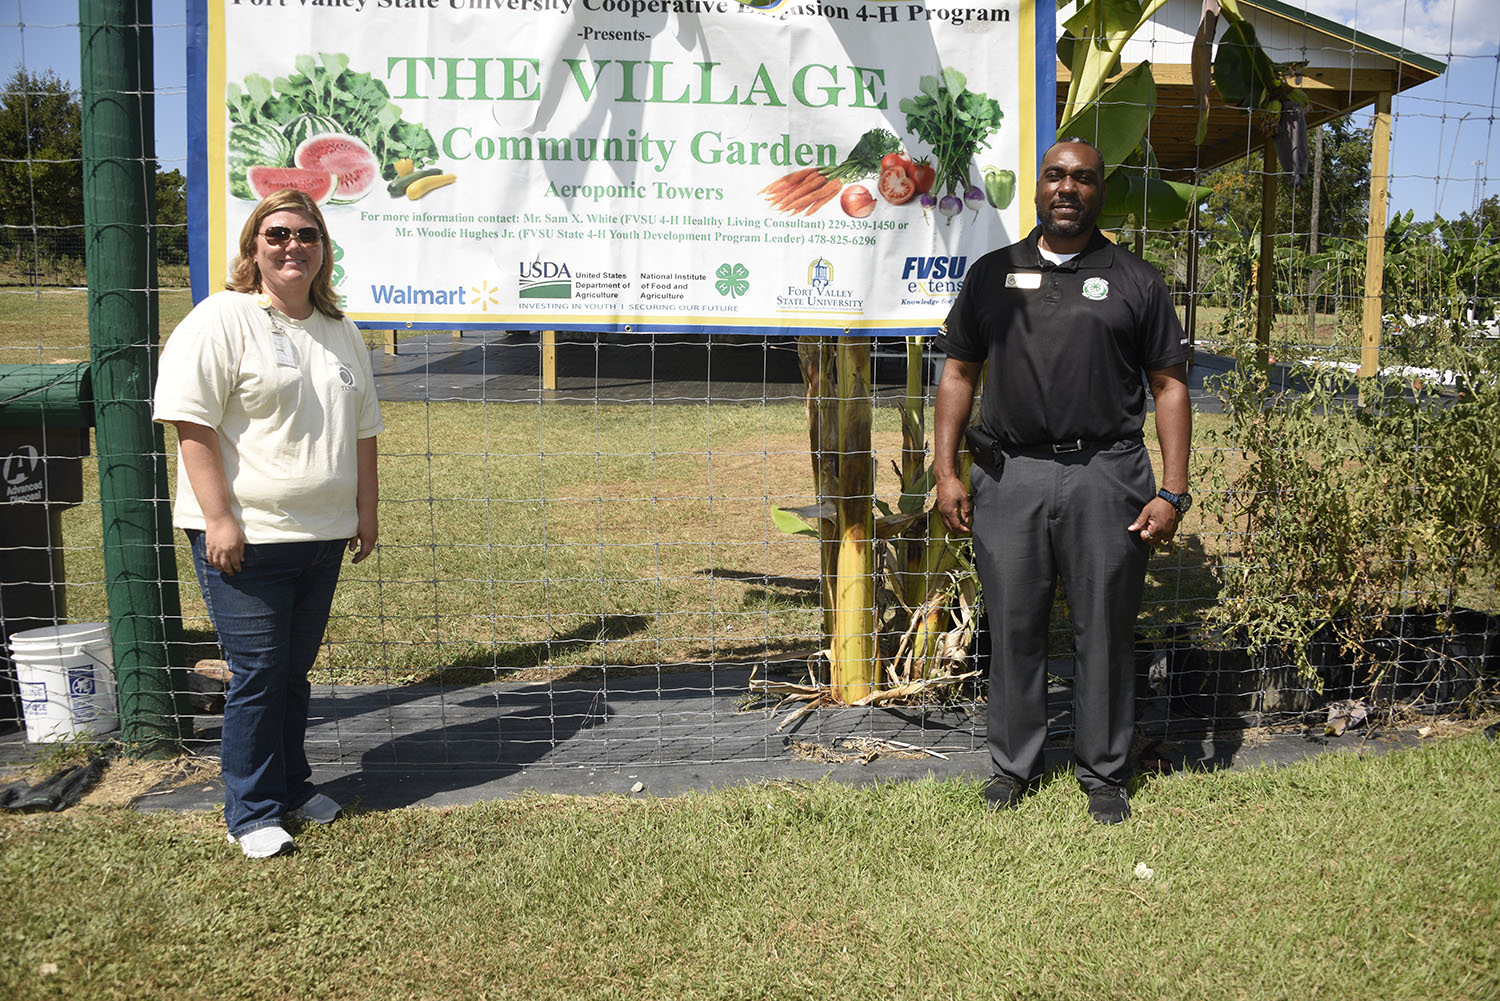 Pam Parten (left), STEM chairperson for Worth County Middle School and Woodie Hughes Jr., FVSU assistant Extension administrator and 4-H program leader, pose in front of Village Community Garden sign in Sylvester.